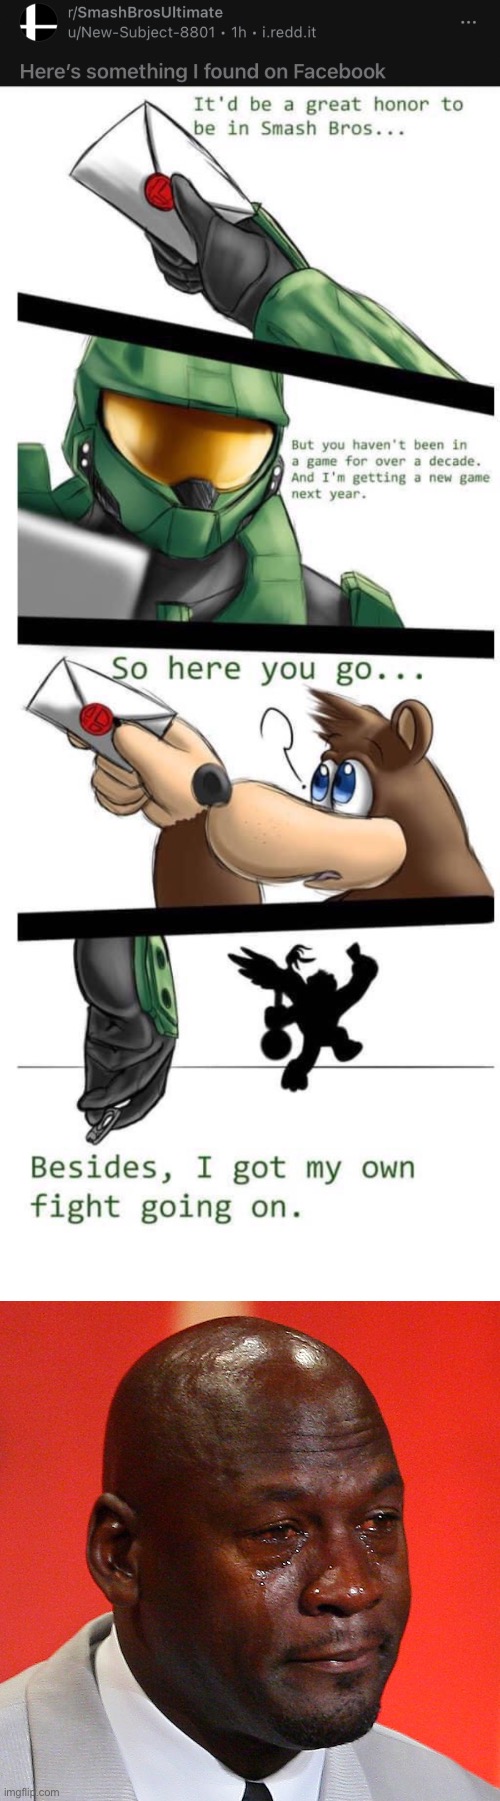 The real reason why Chief didn’t join SSBU. (Repost from Reddit that was reposted from Facebook) | image tagged in black guy crying | made w/ Imgflip meme maker